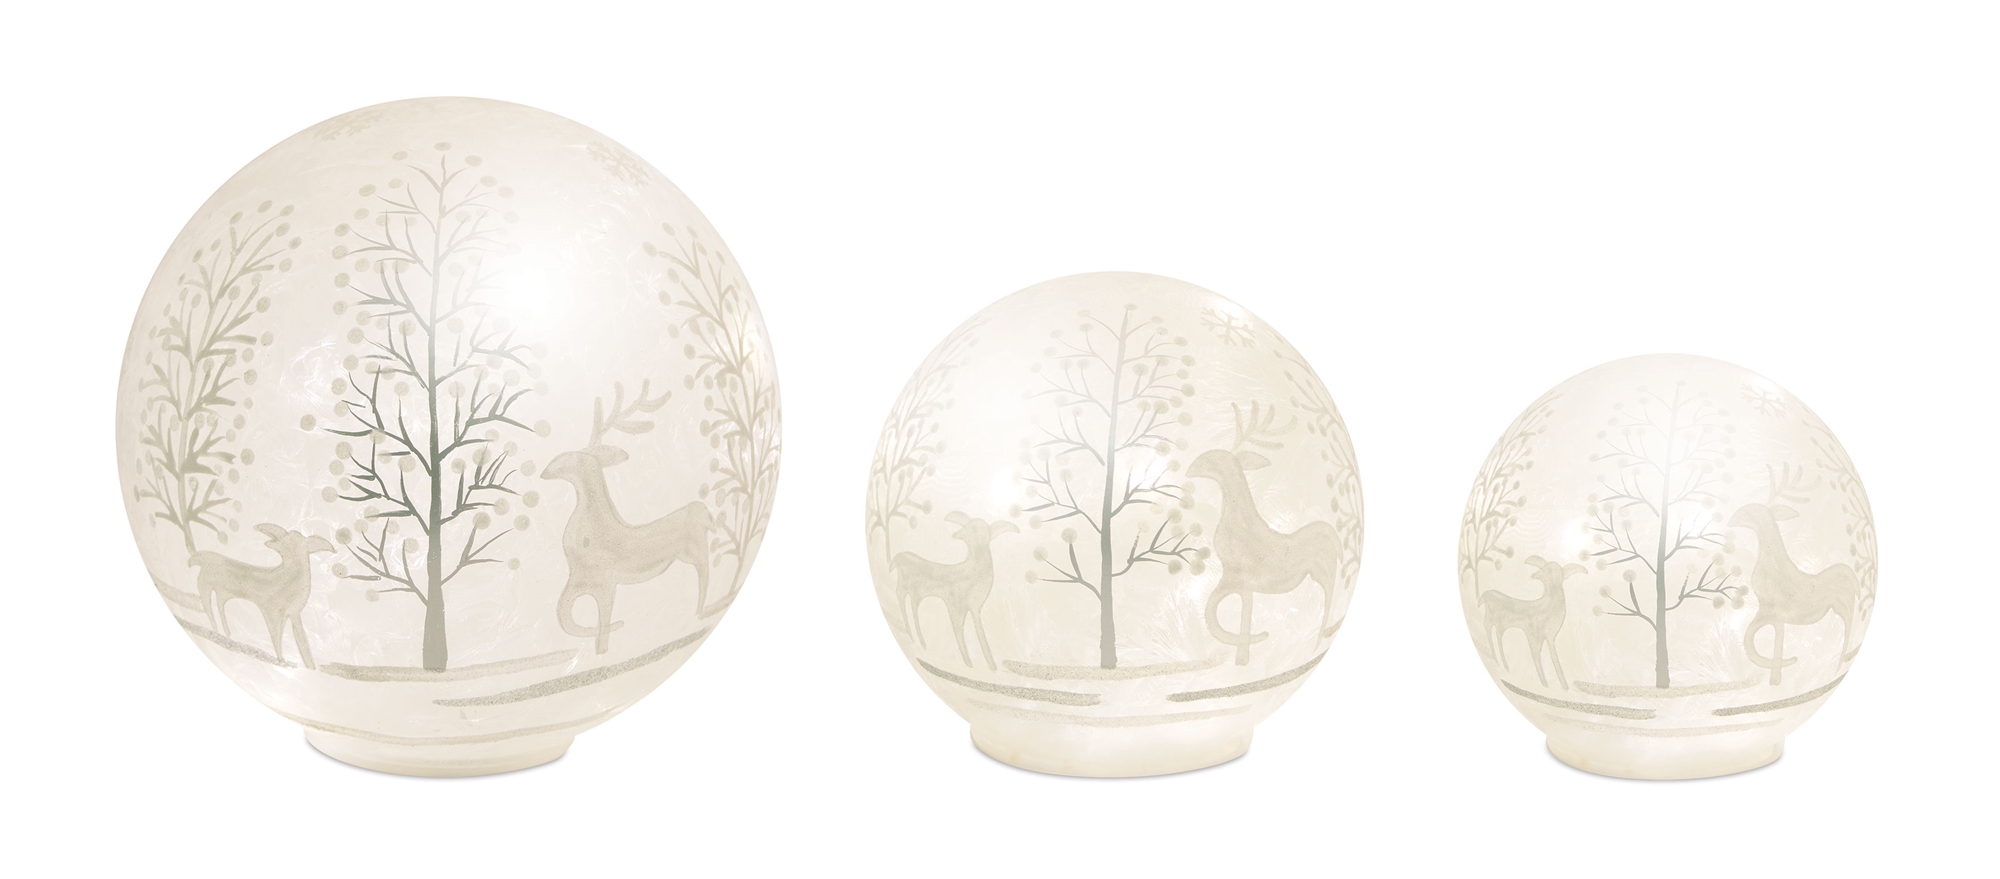 Deer and Tree Globe/Timer (Set of 3) 4.25"H, 5.5"H, 7.75"H Glass